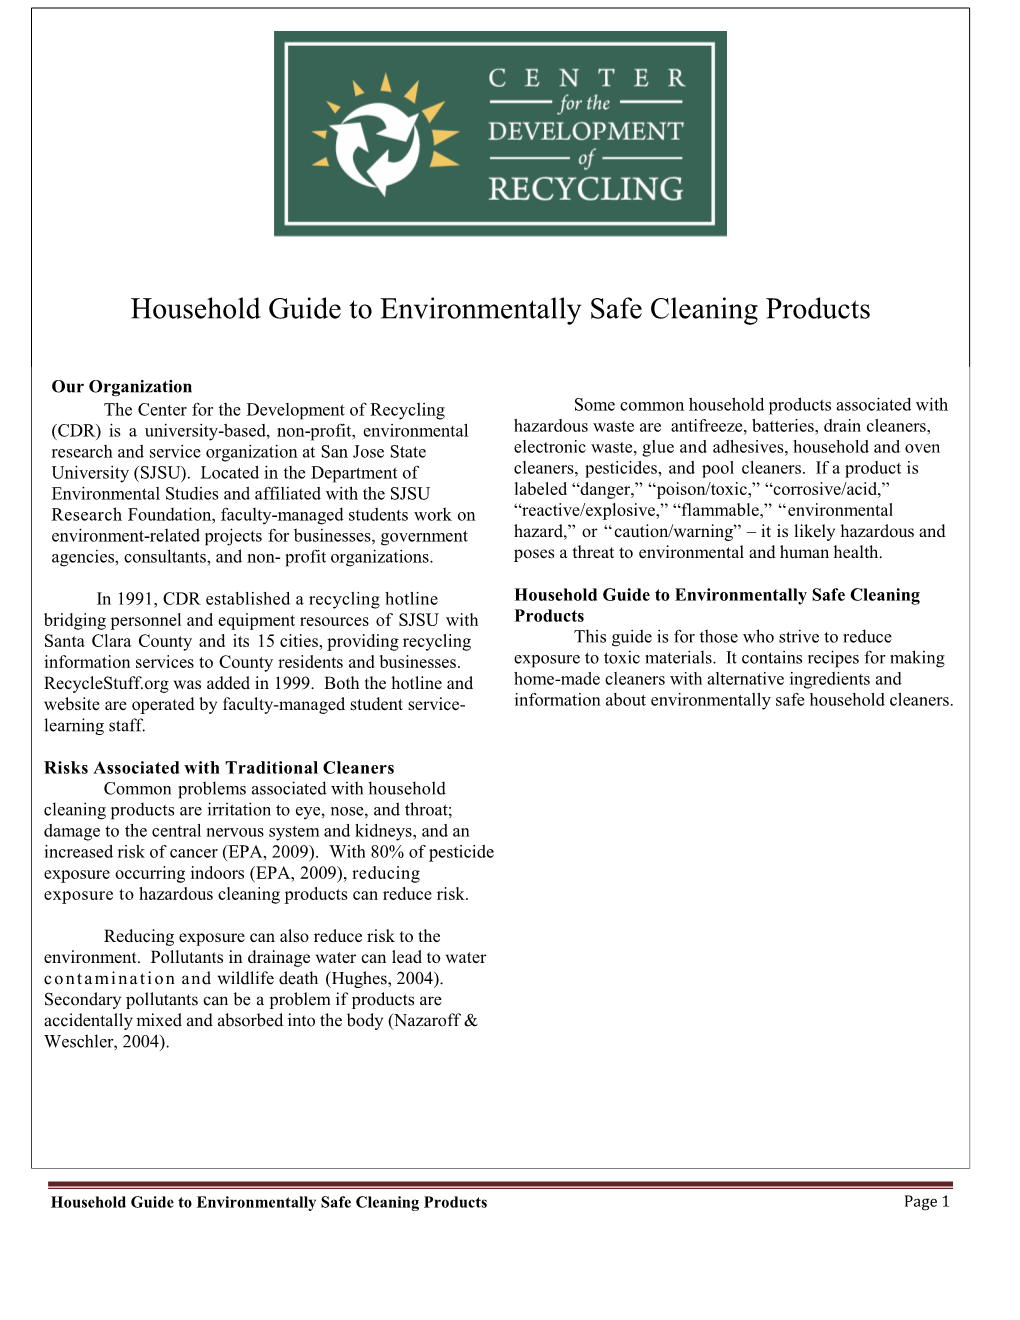 Household Guide to Environmentally Safe Cleaning Products